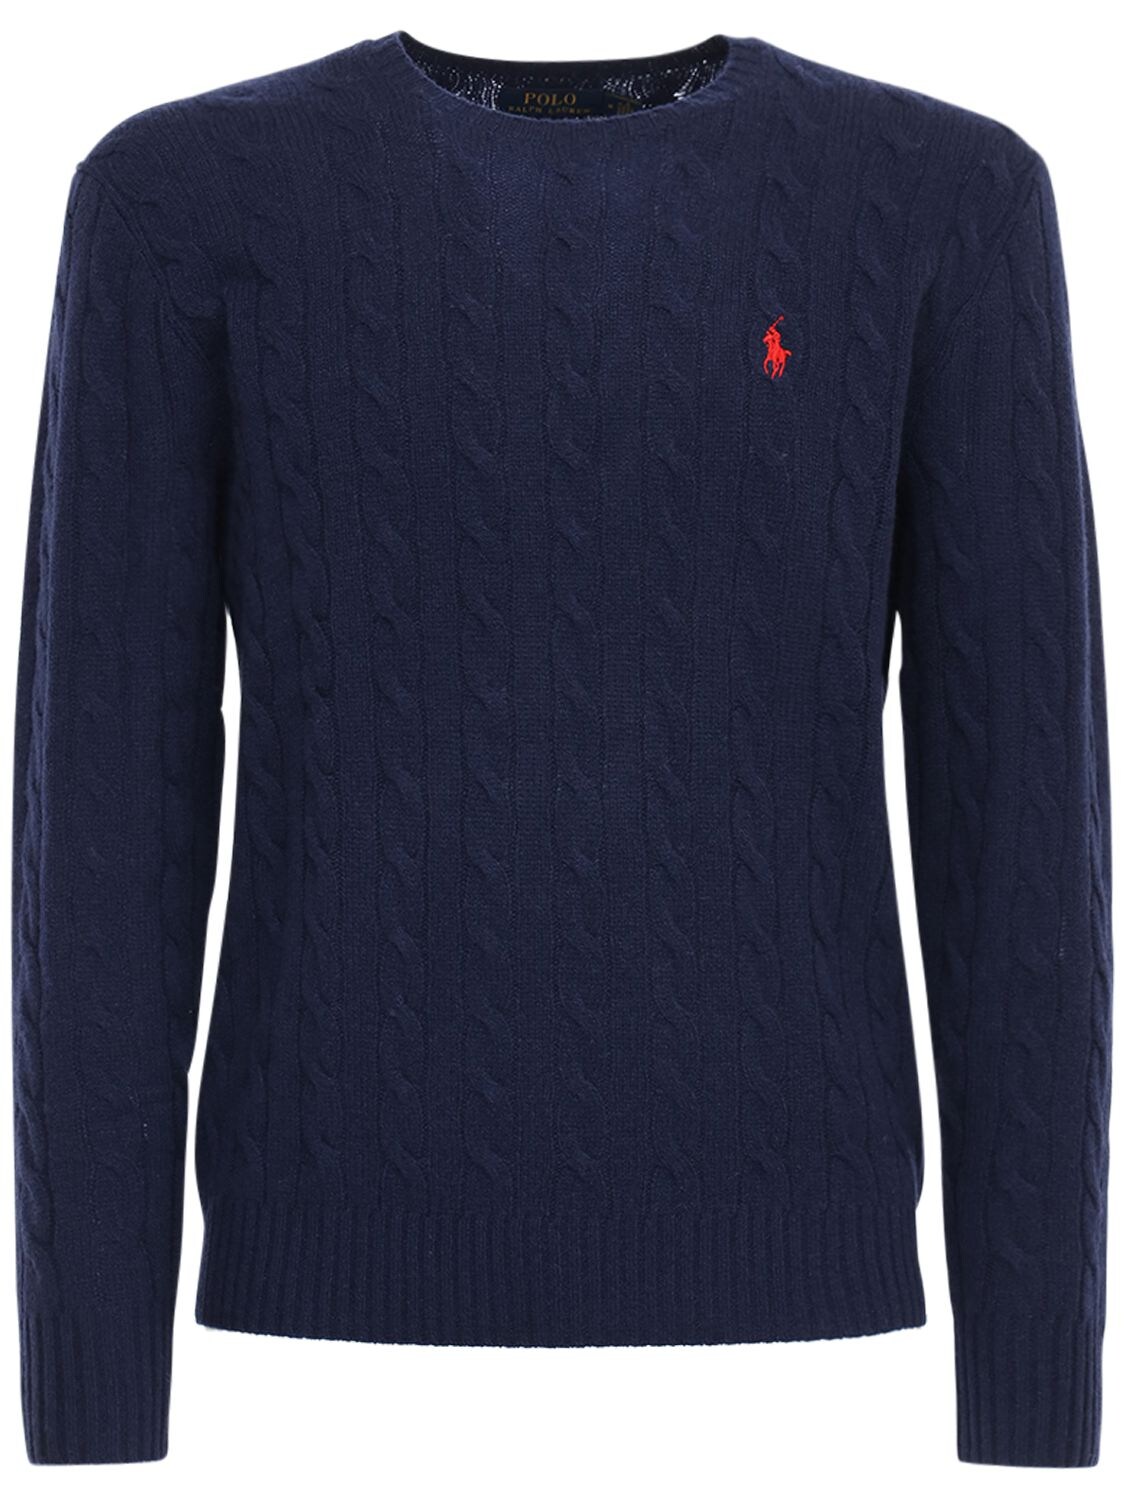 Polo Ralph Lauren Wool & Cashmere Knit Sweater In Navy